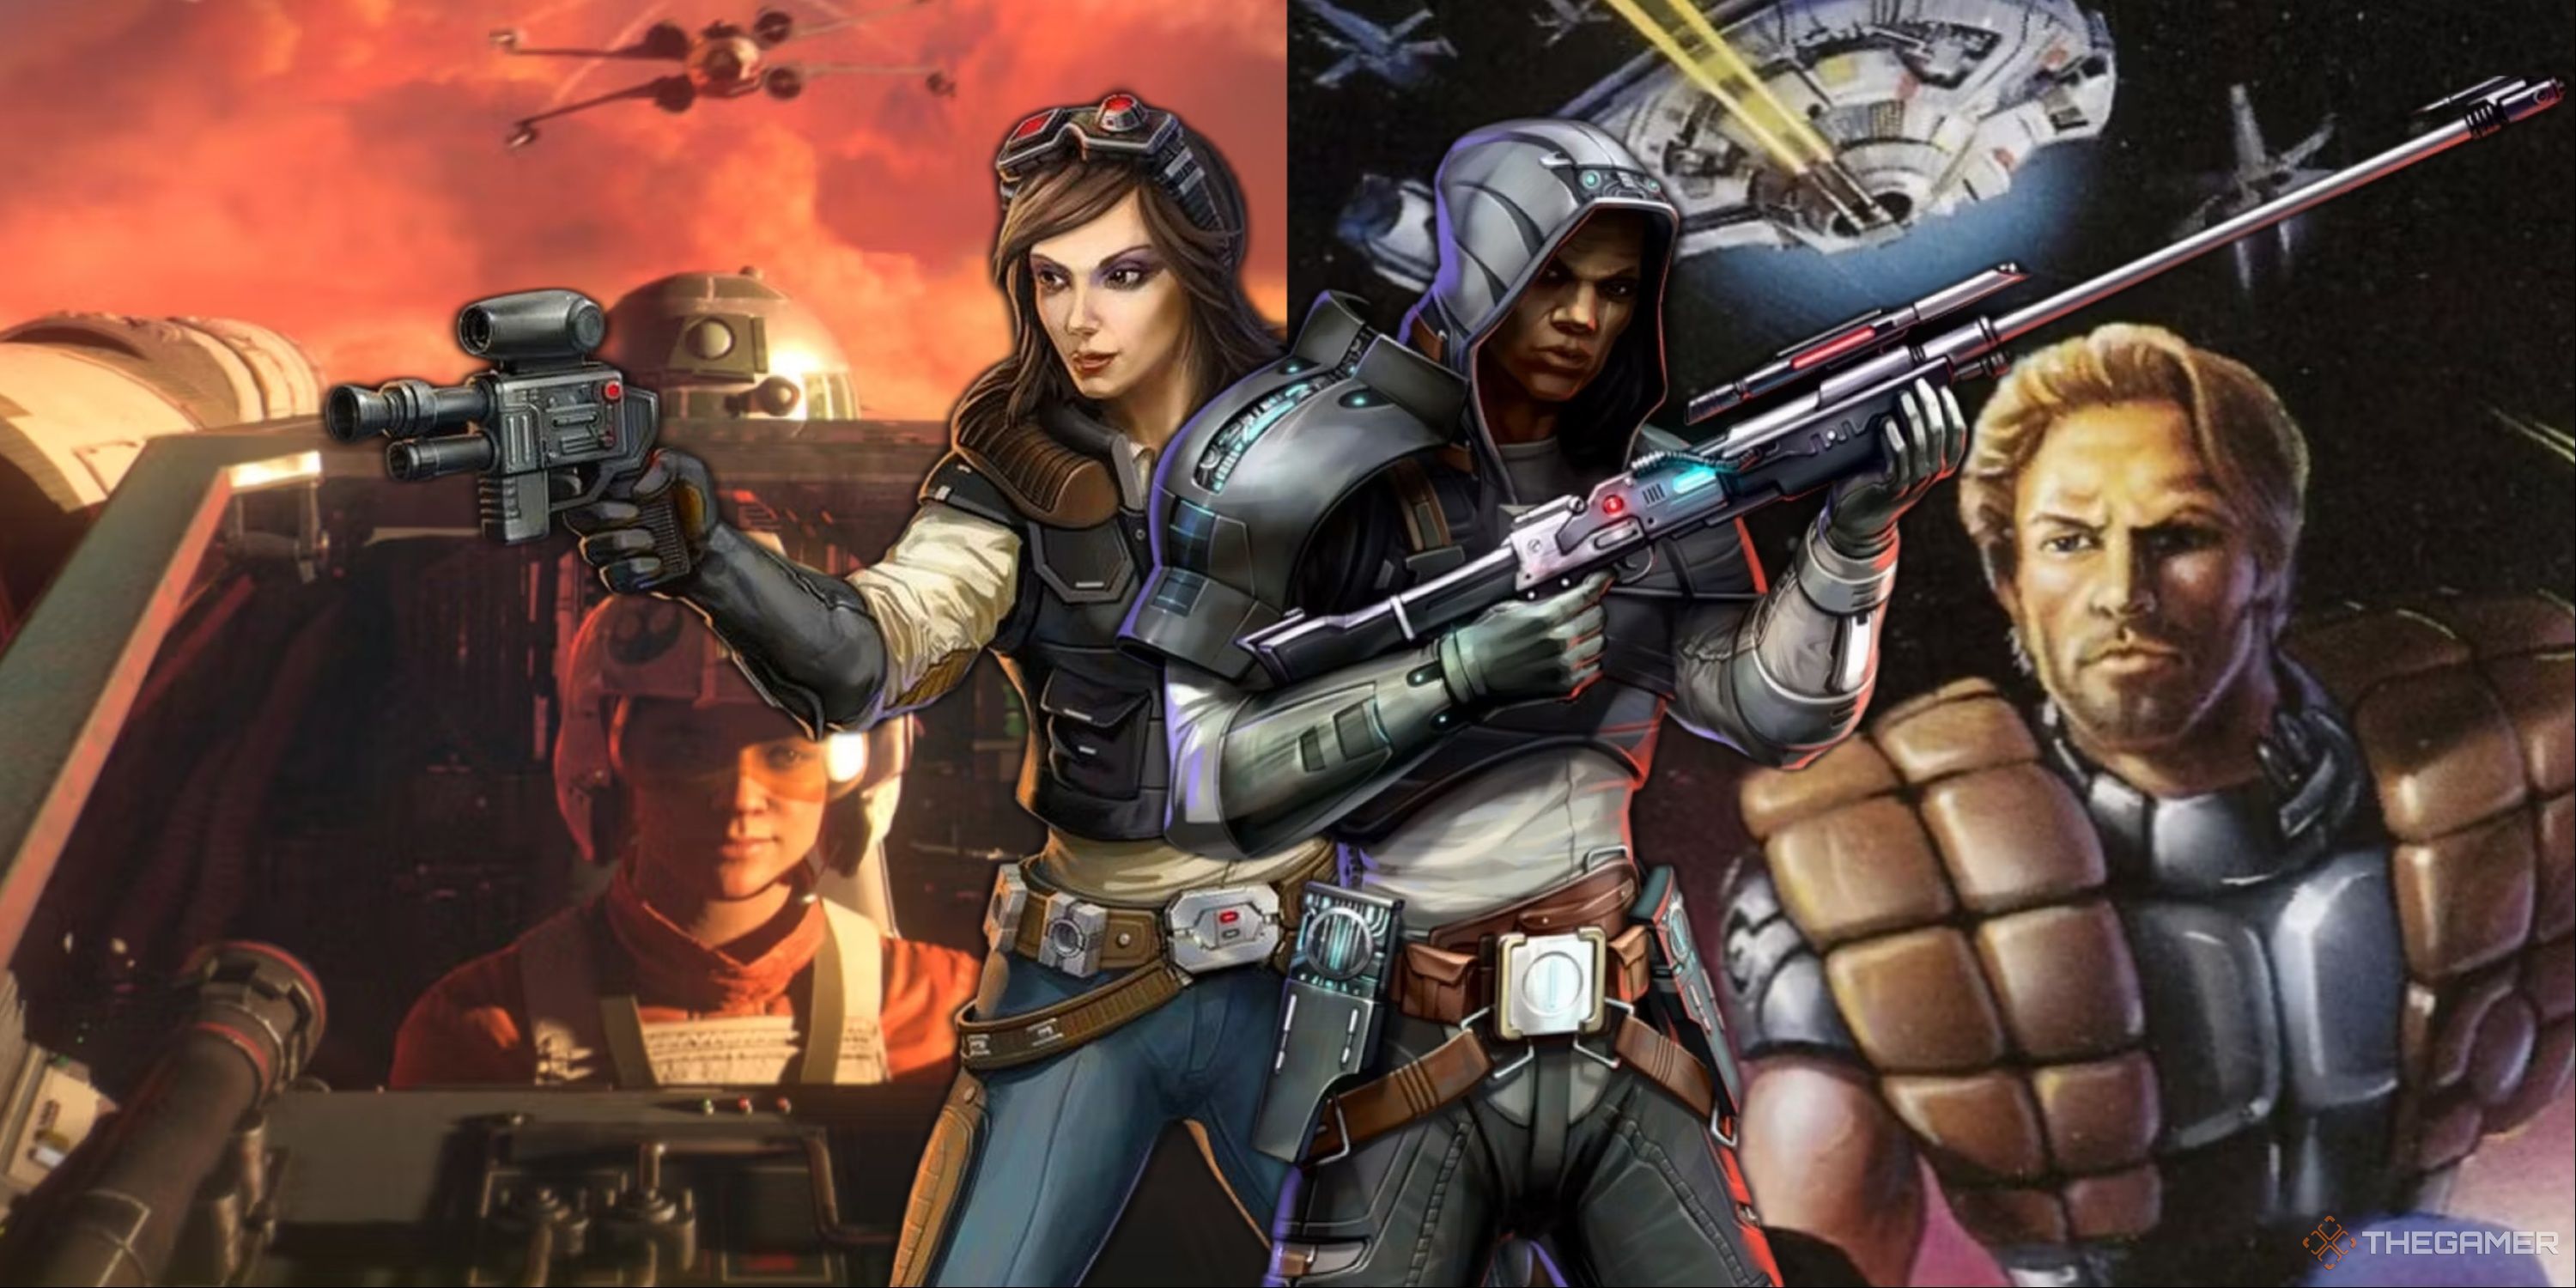 Split-image of art from Star Wars Squadrons and Star Wars: Shadows of the Empire with the Smuggler class and Imperial Agent class side-by-side in between the collage images.